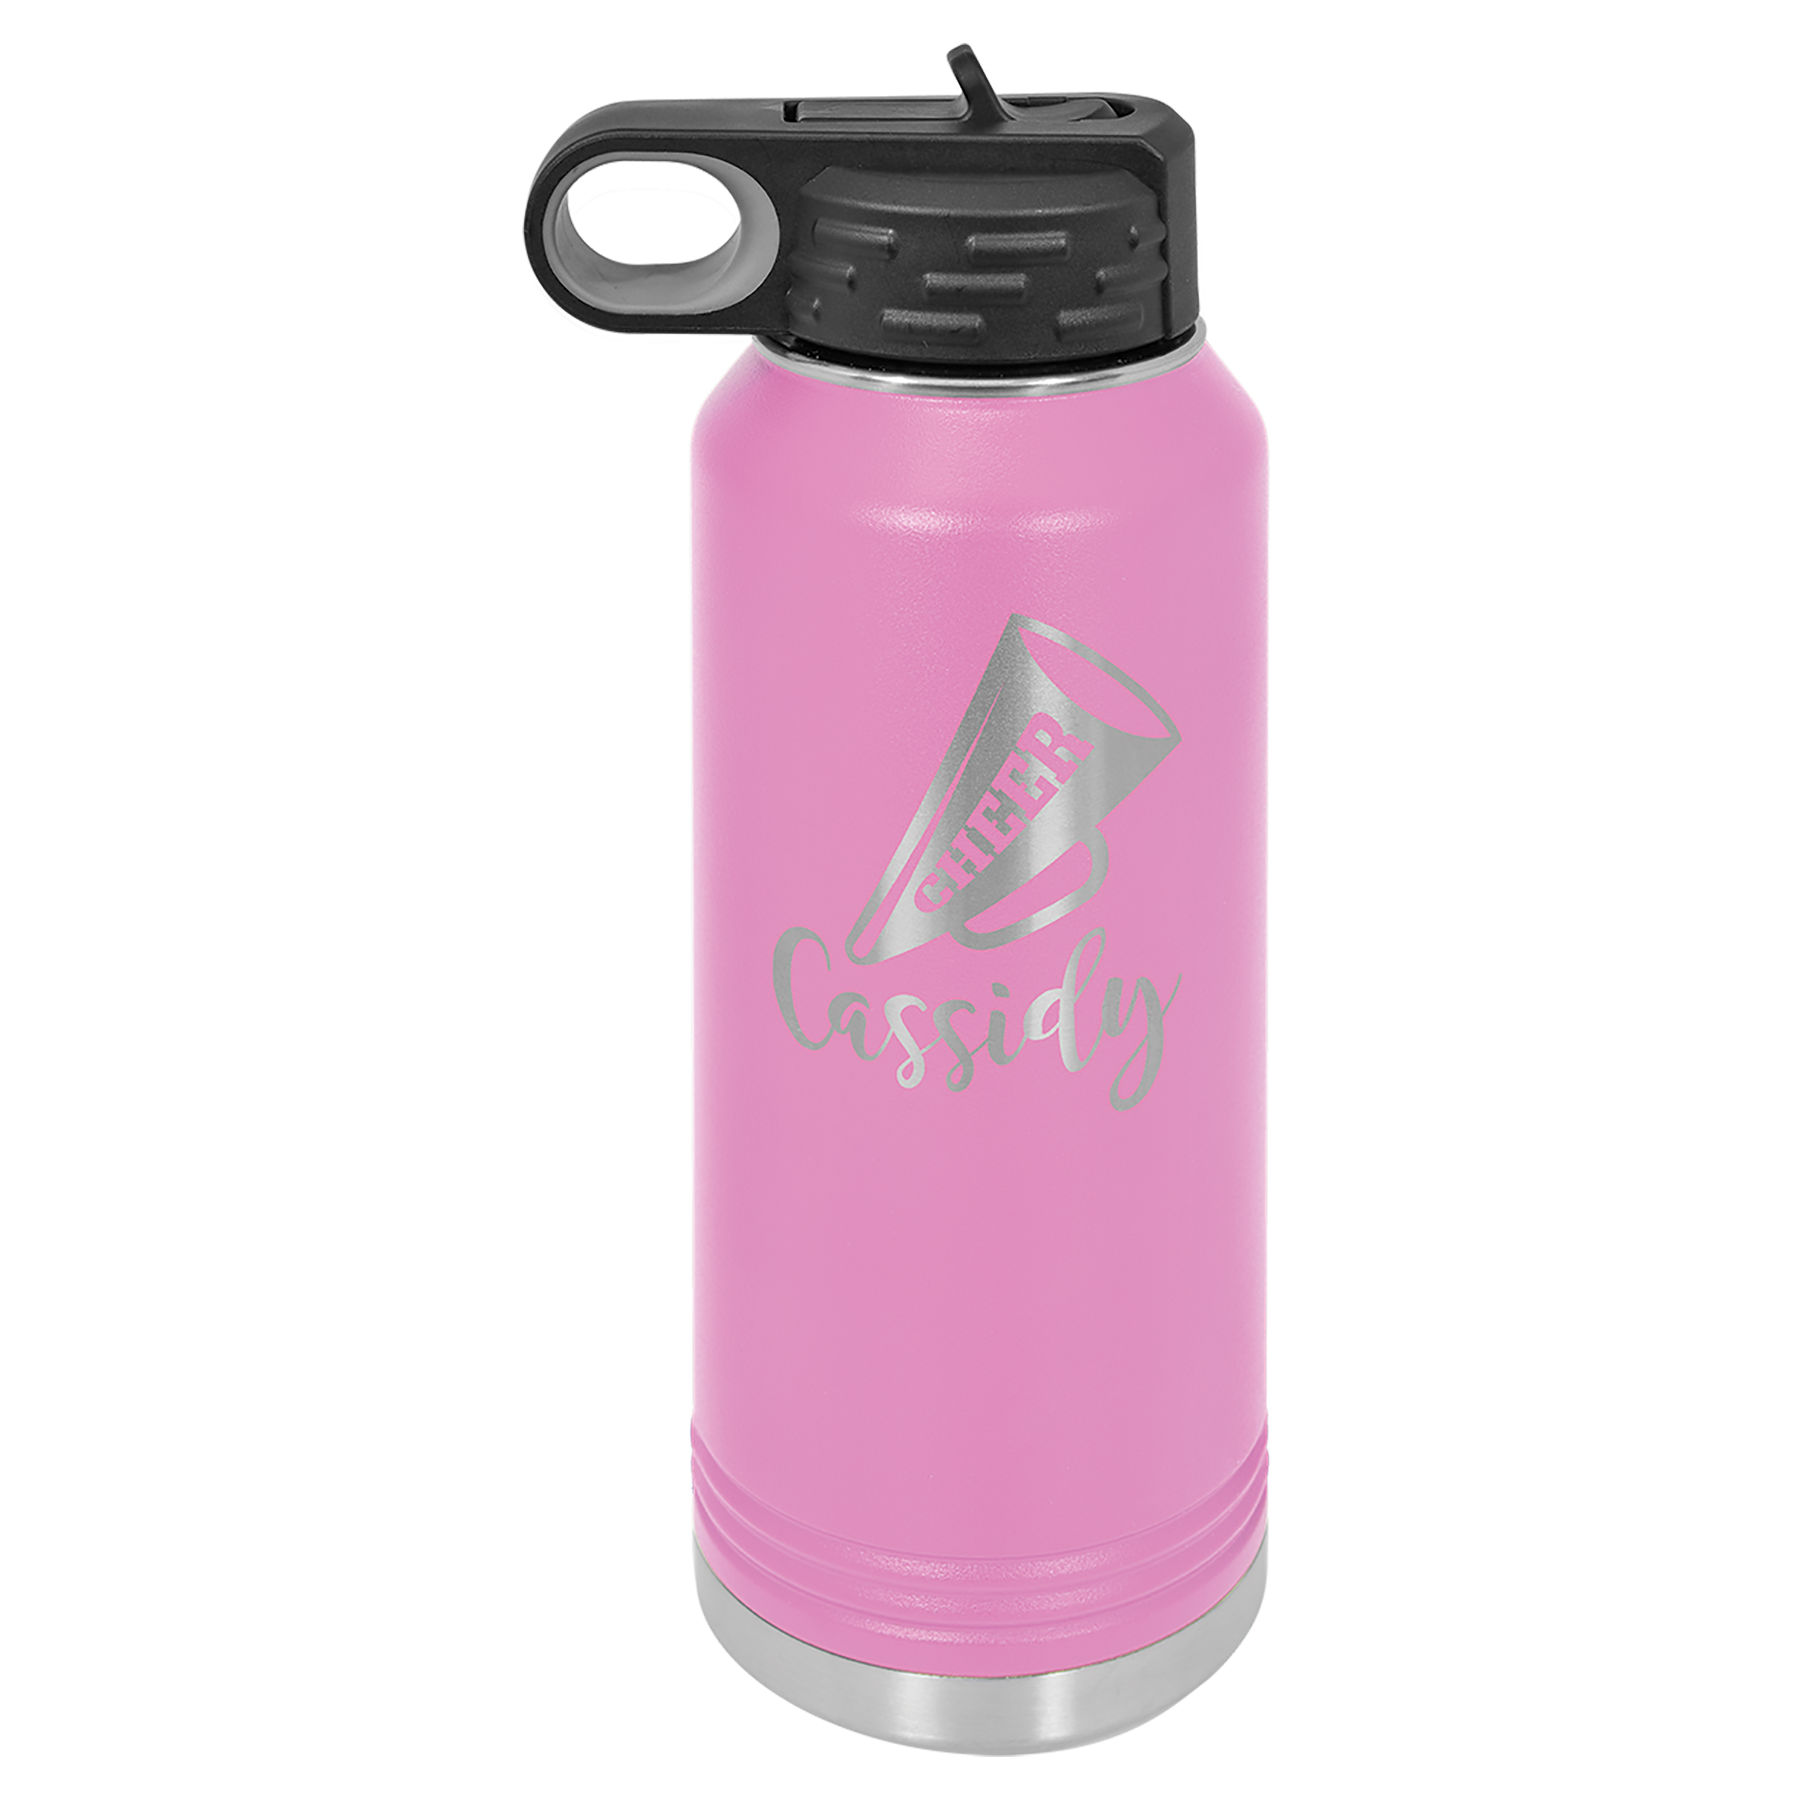 32 oz. Light Purple Stainless Steel Insulated Water Bottler.  Customizable with your personal image or saying.